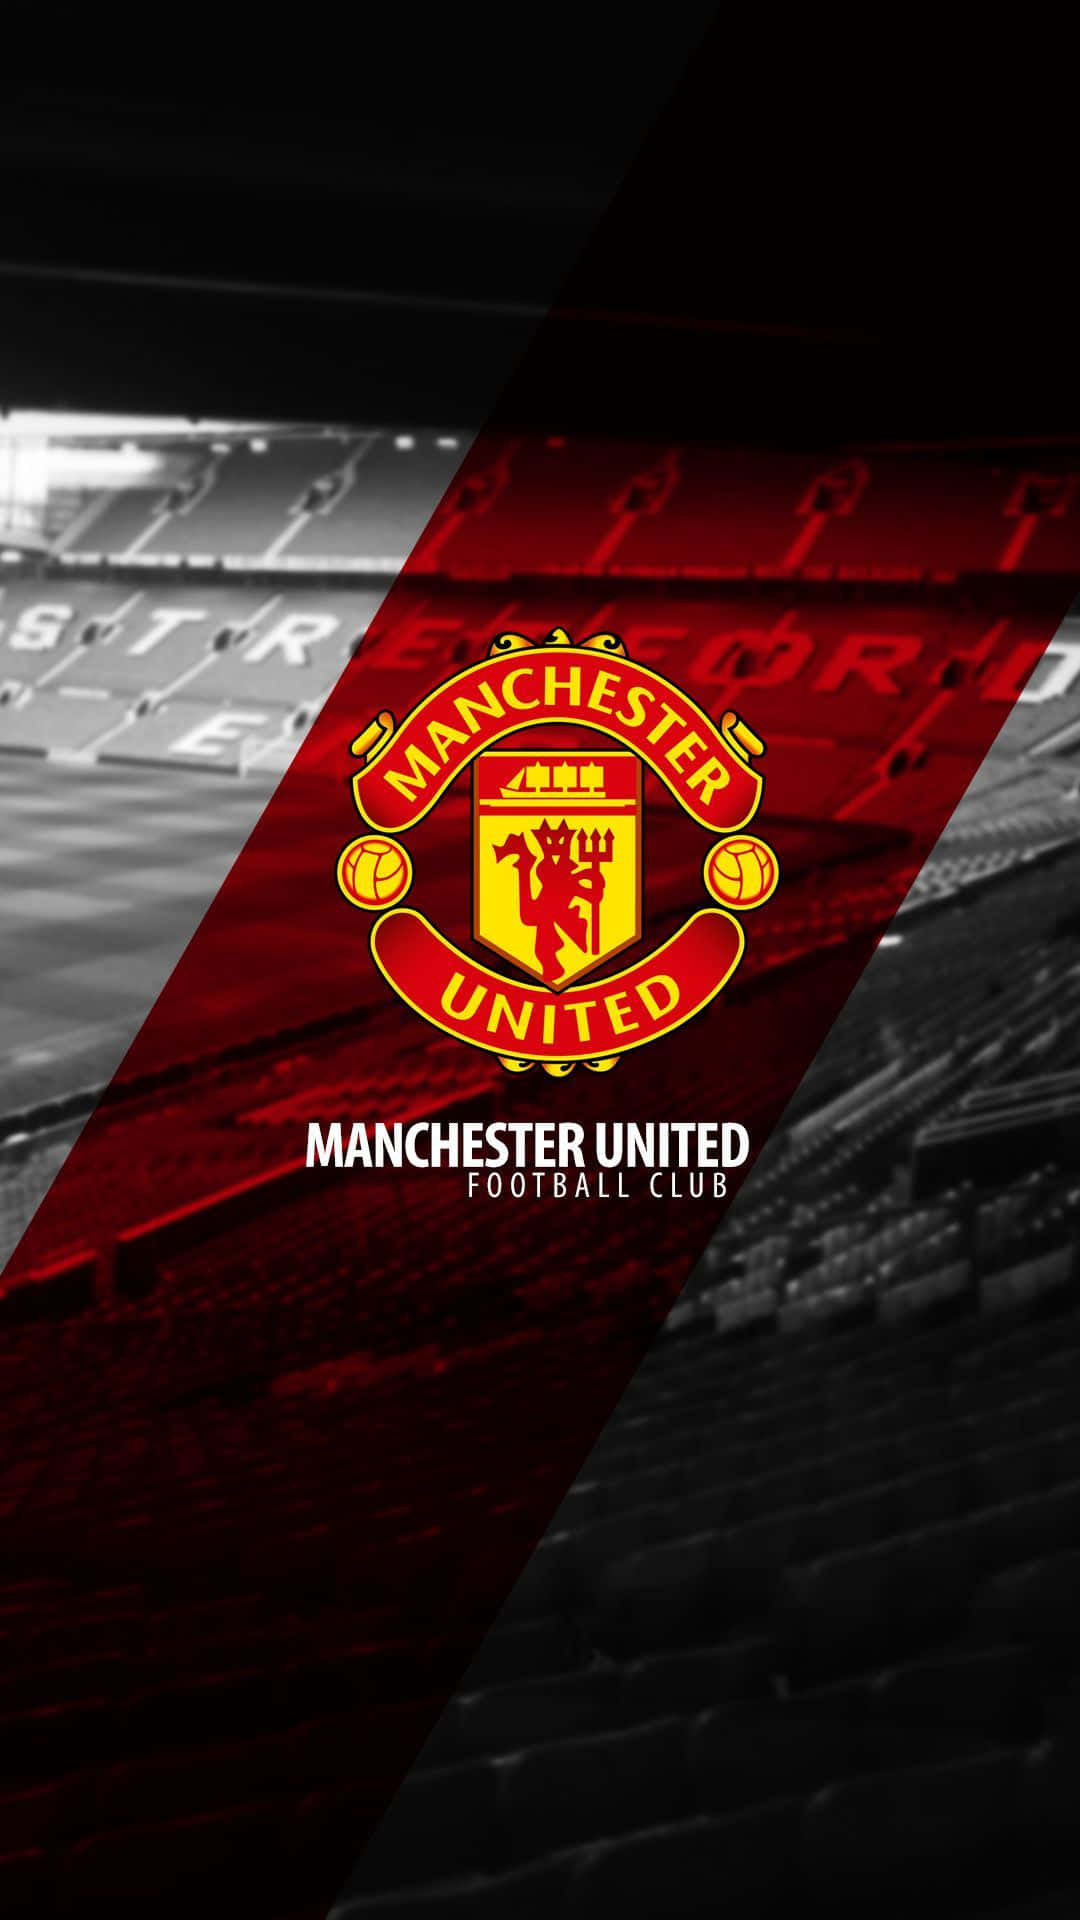 Show Your Support And Download A Special Manchester United Iphone Wallpaper. Background